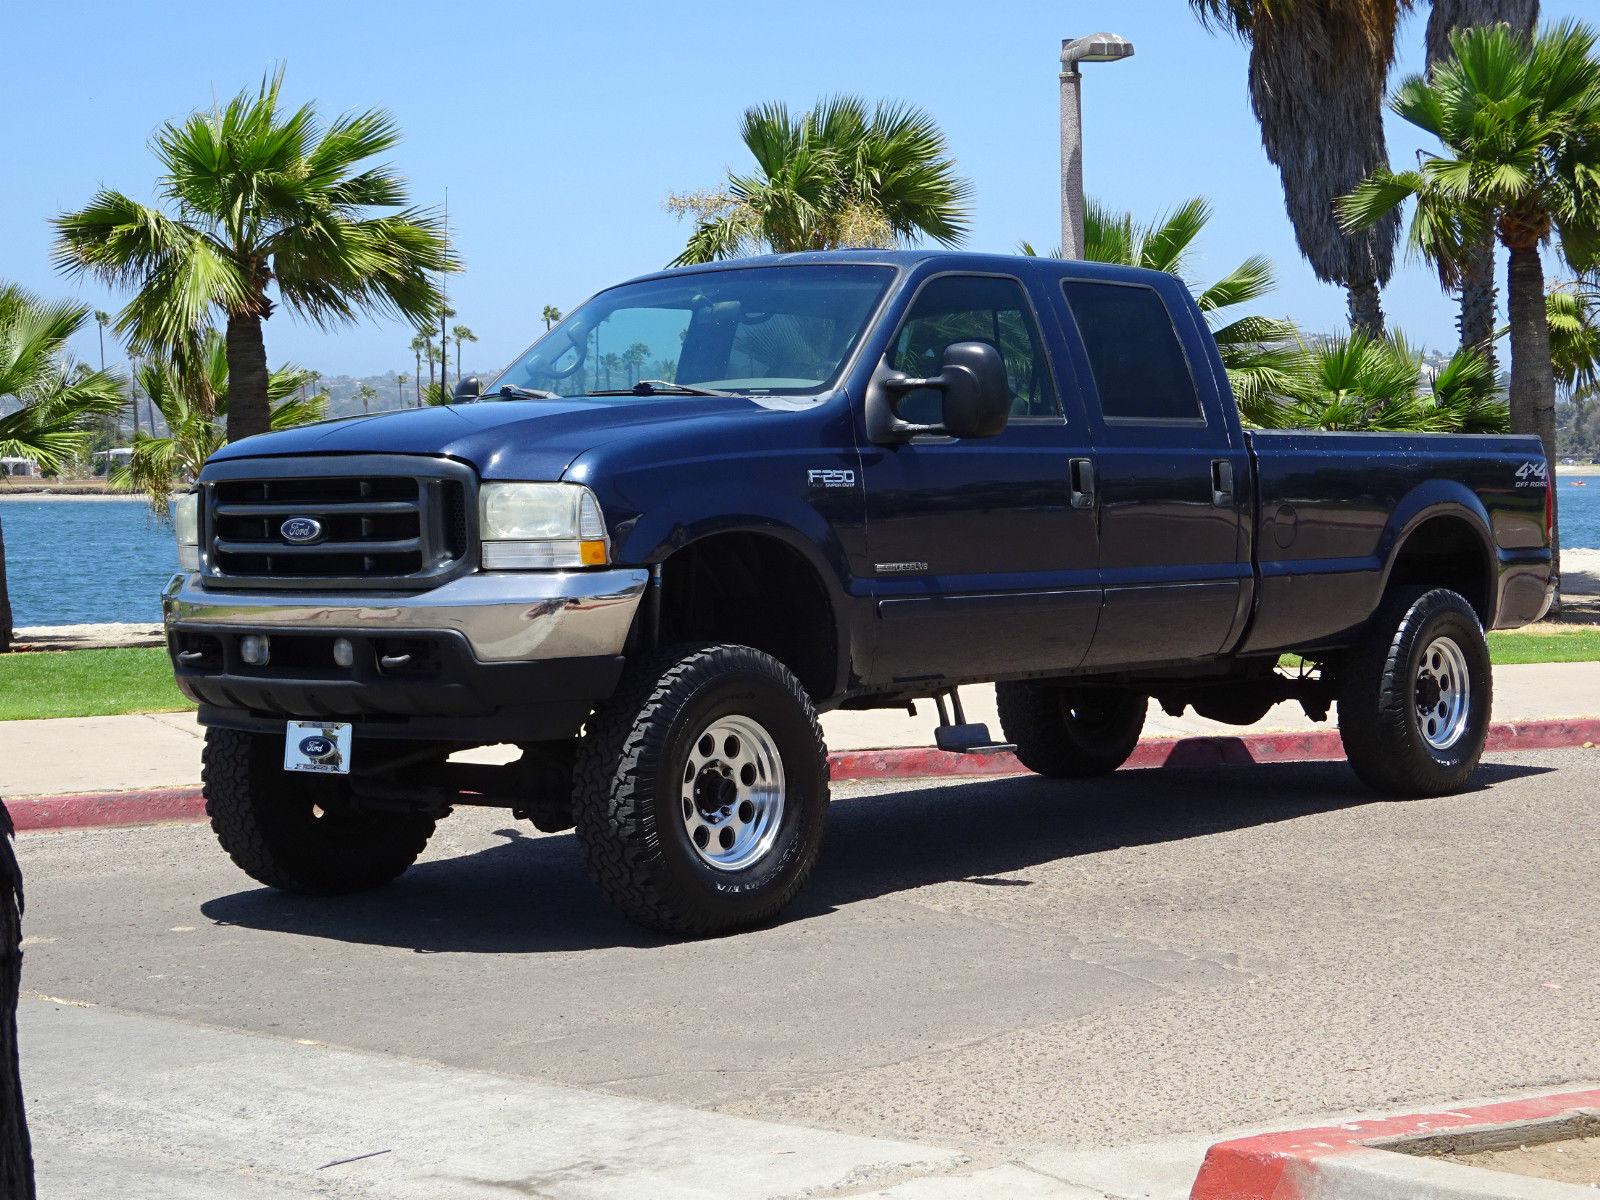 2002 Ford F-250 XLT 7.3L Diesel Crew Cab 4×4 for sale